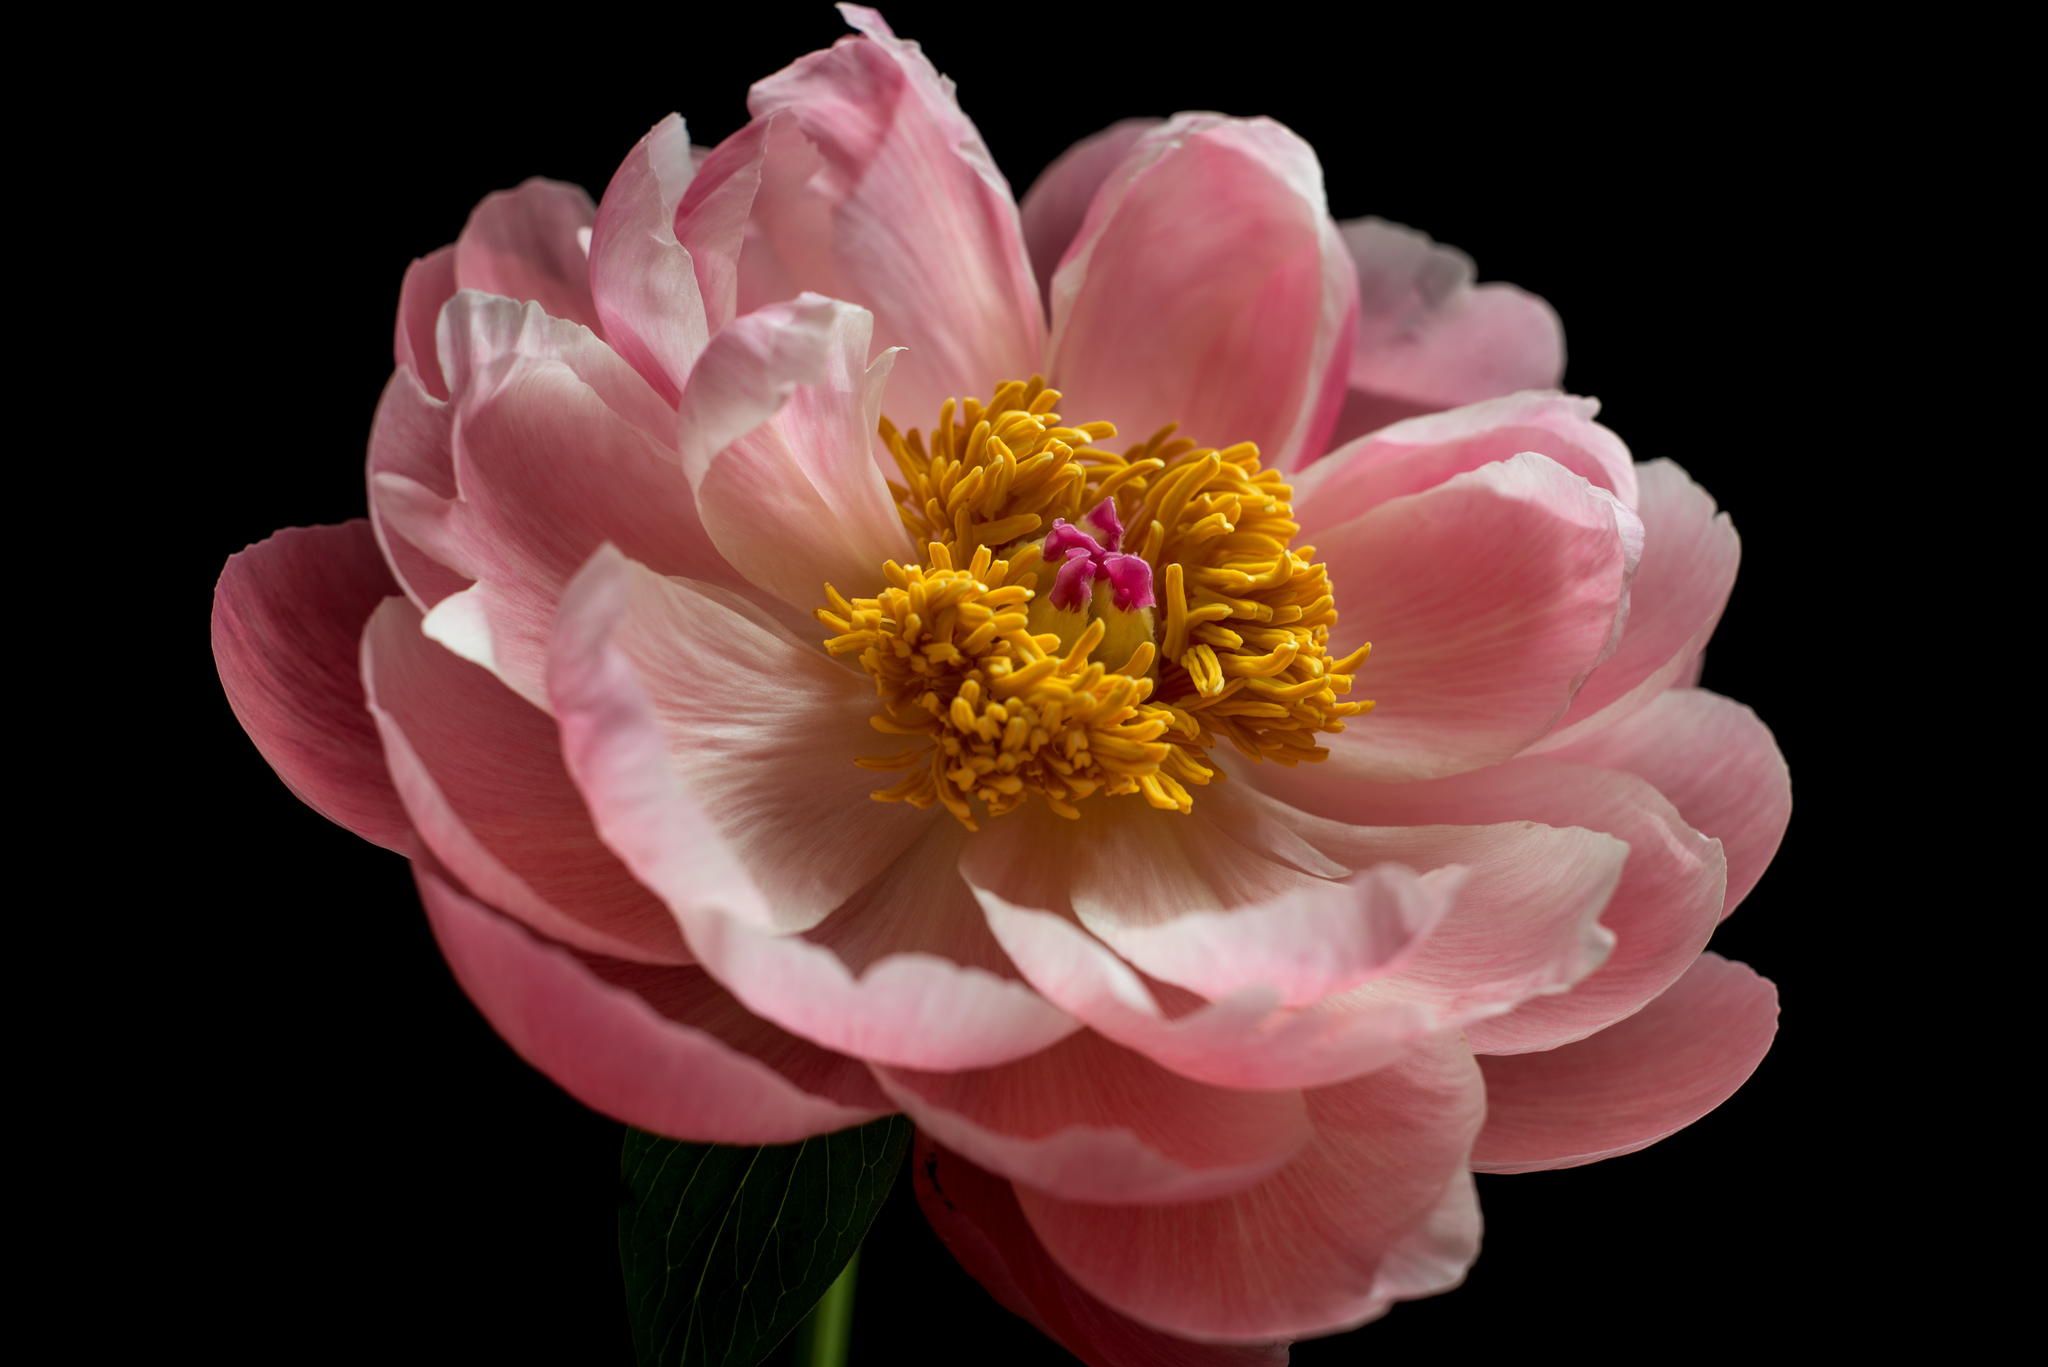 Pink Peony : Flower macro - Click the image to view on black, then ...